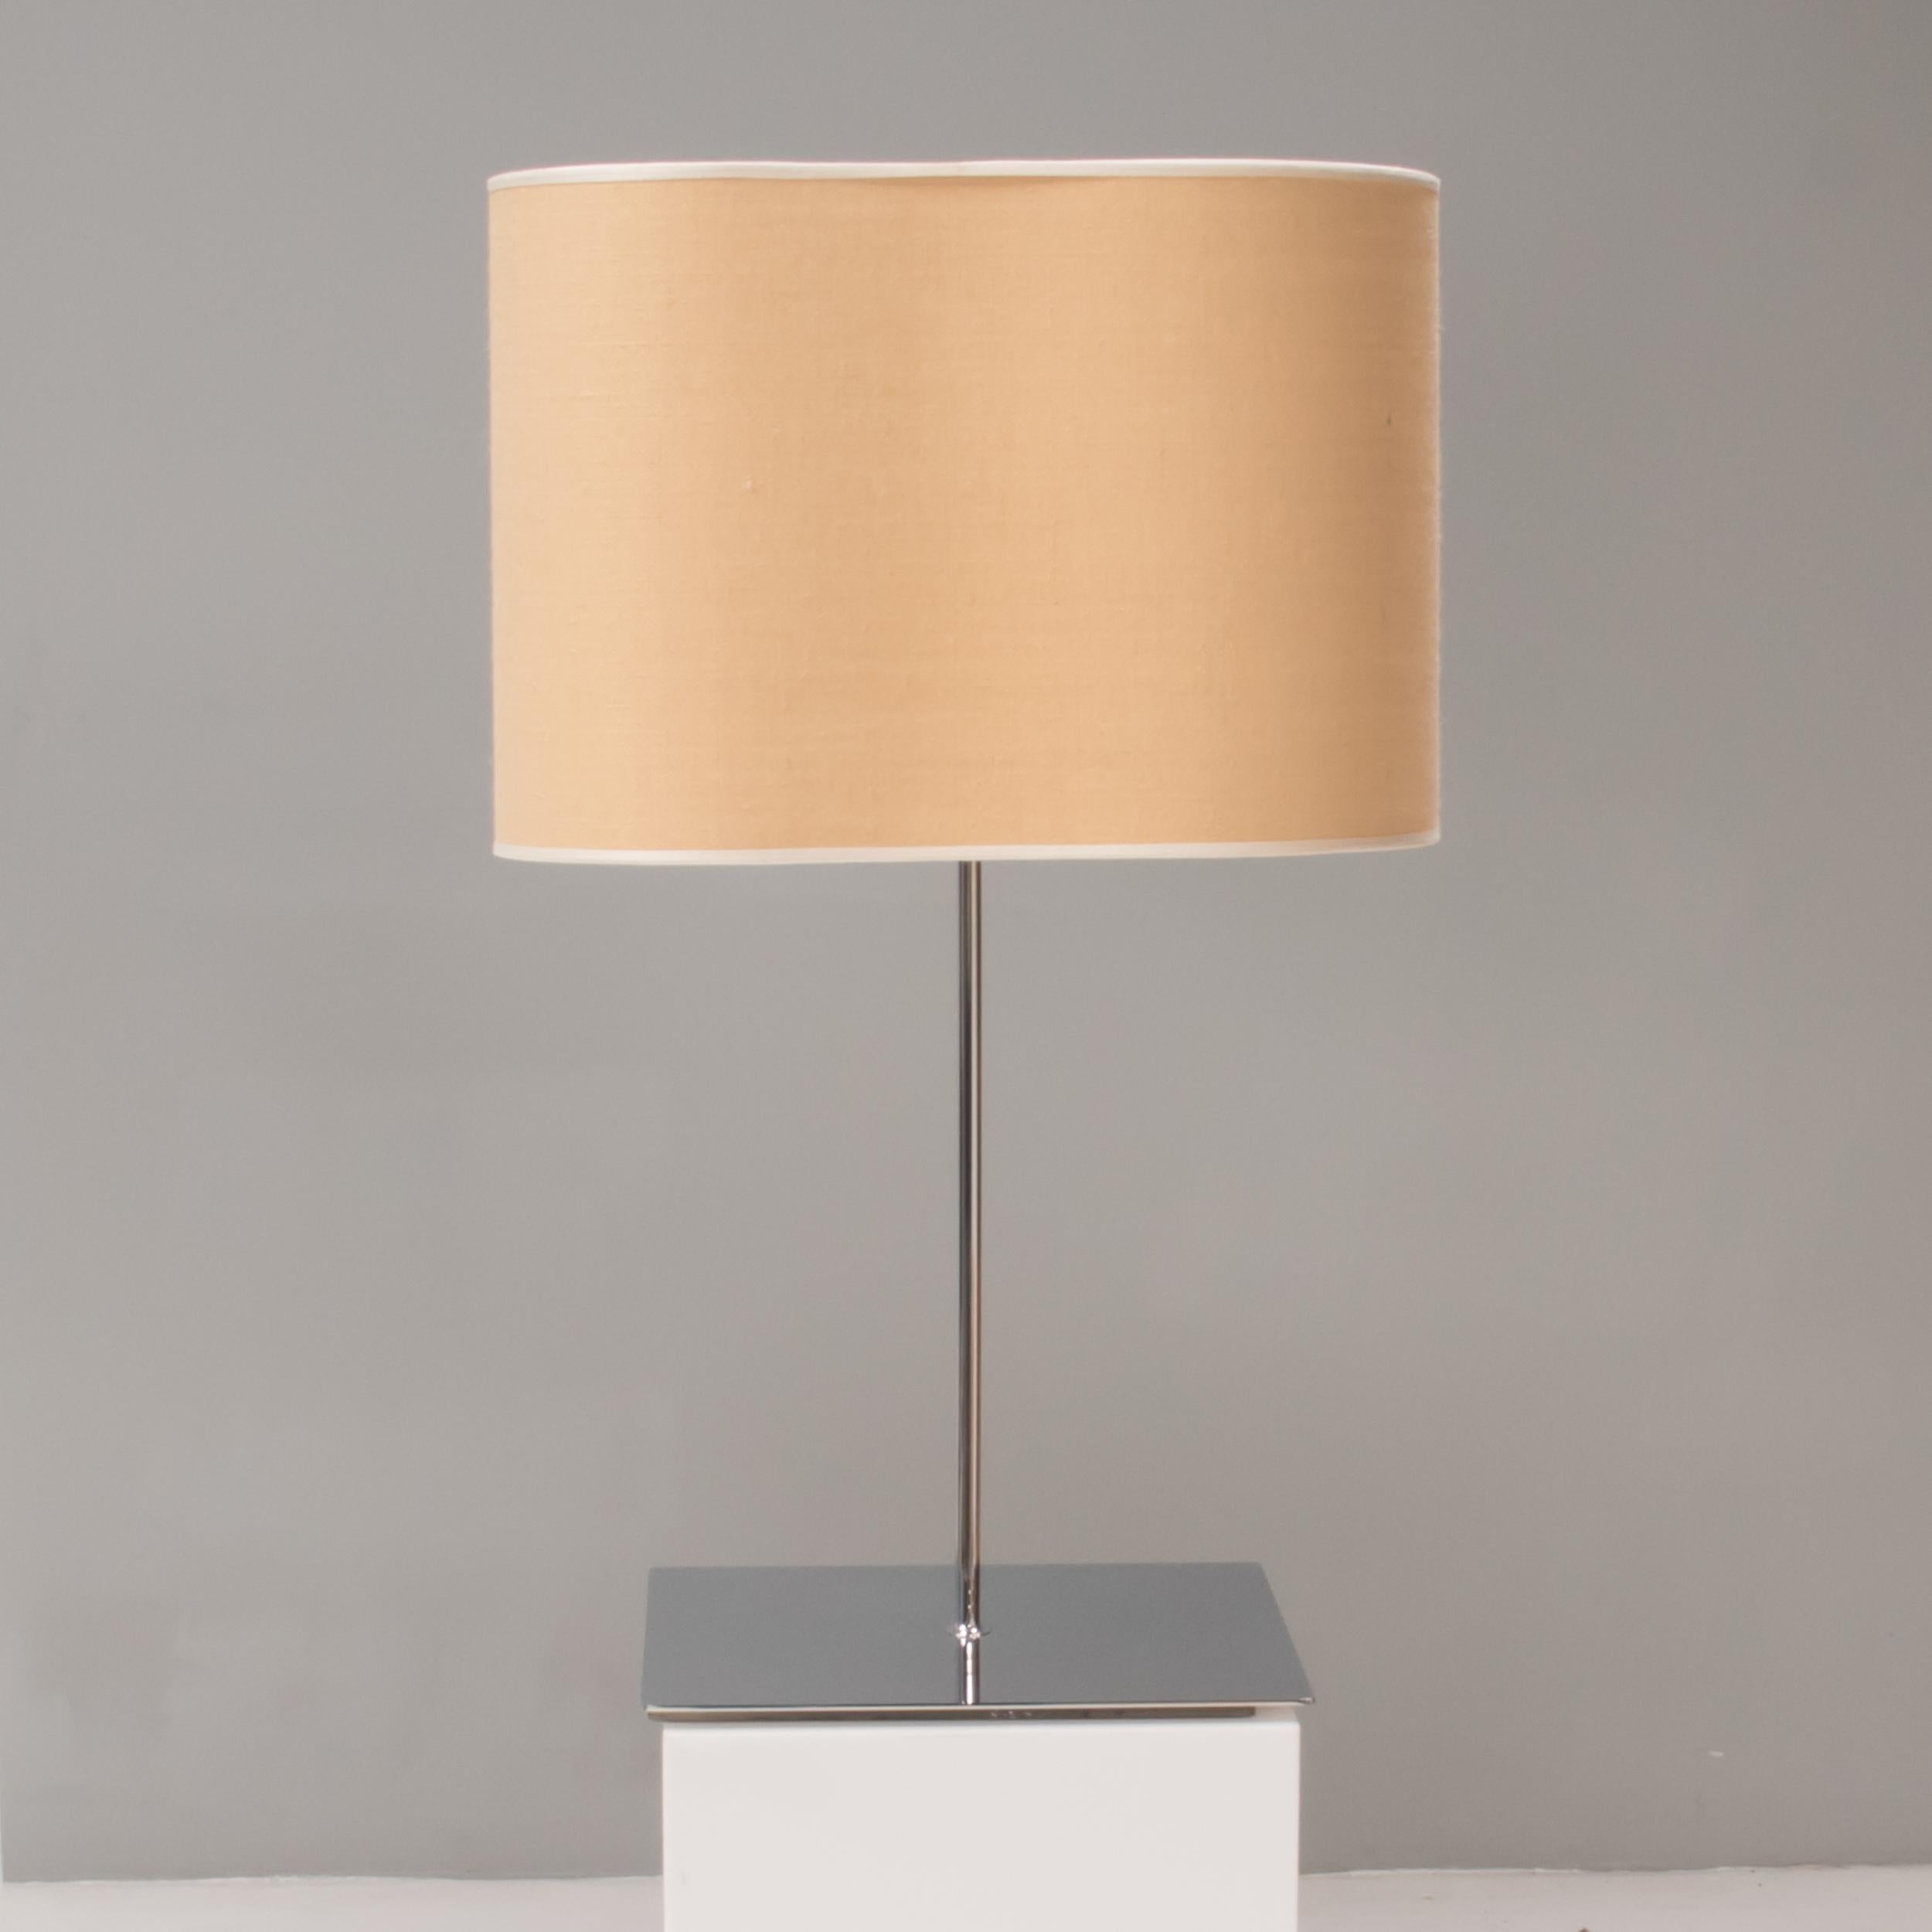 Designed by Enrico Franzoloni for Karboxx, the Peggy table lamp is a fantastic example of modern design.

With a square chromed metal base and tubular stand, the table lamps feature shades in natural jute fabric with an organic, curvy